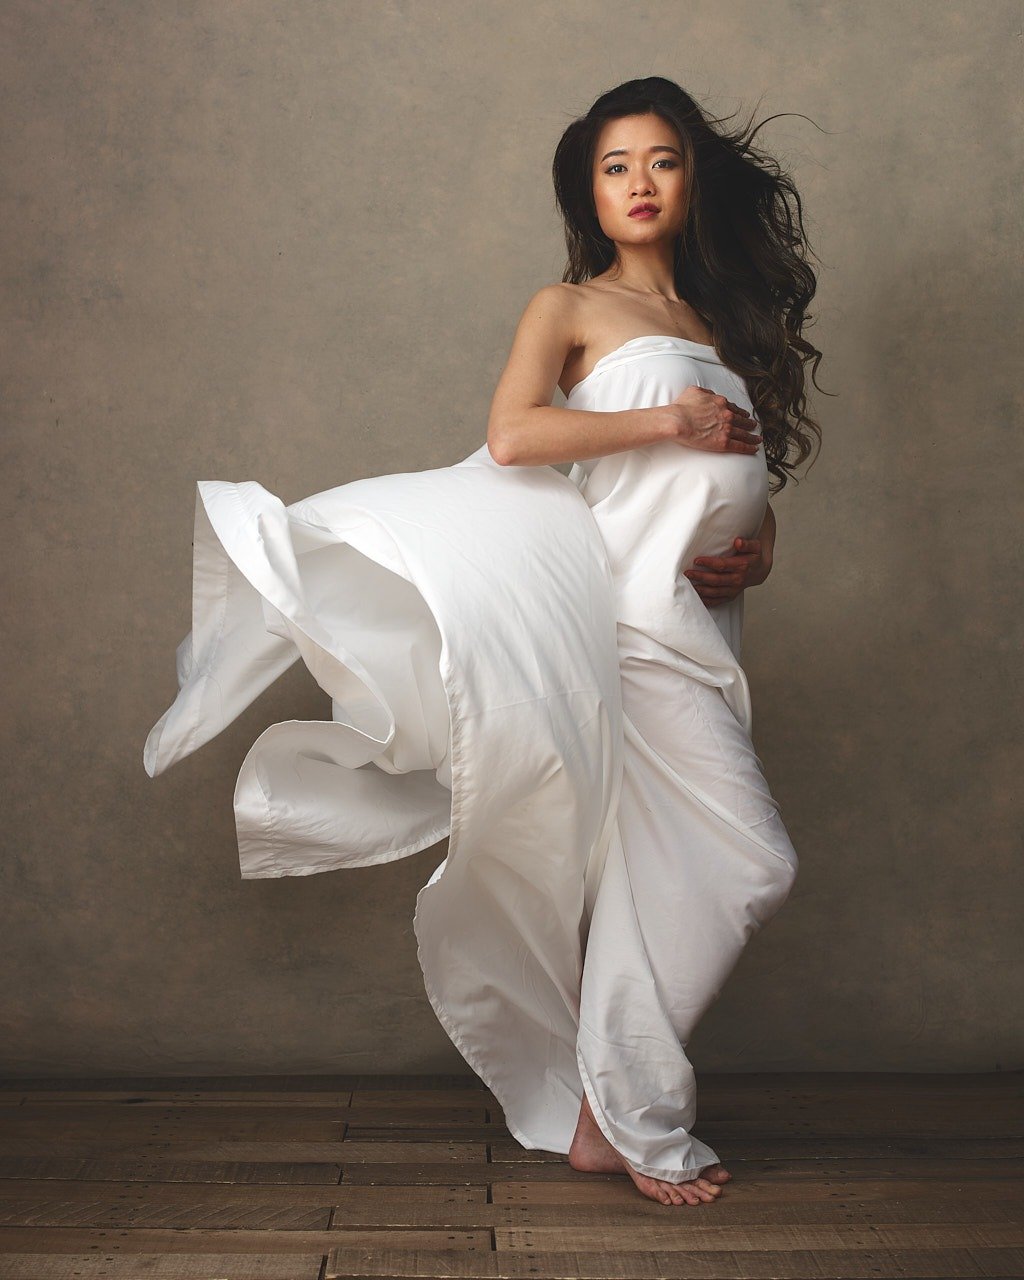 Maternity photo of pregnant asian woman in white flowing fabric. Maternity photographer near Washington DC. Portraits by Jared Wolfe in Alexandria VA